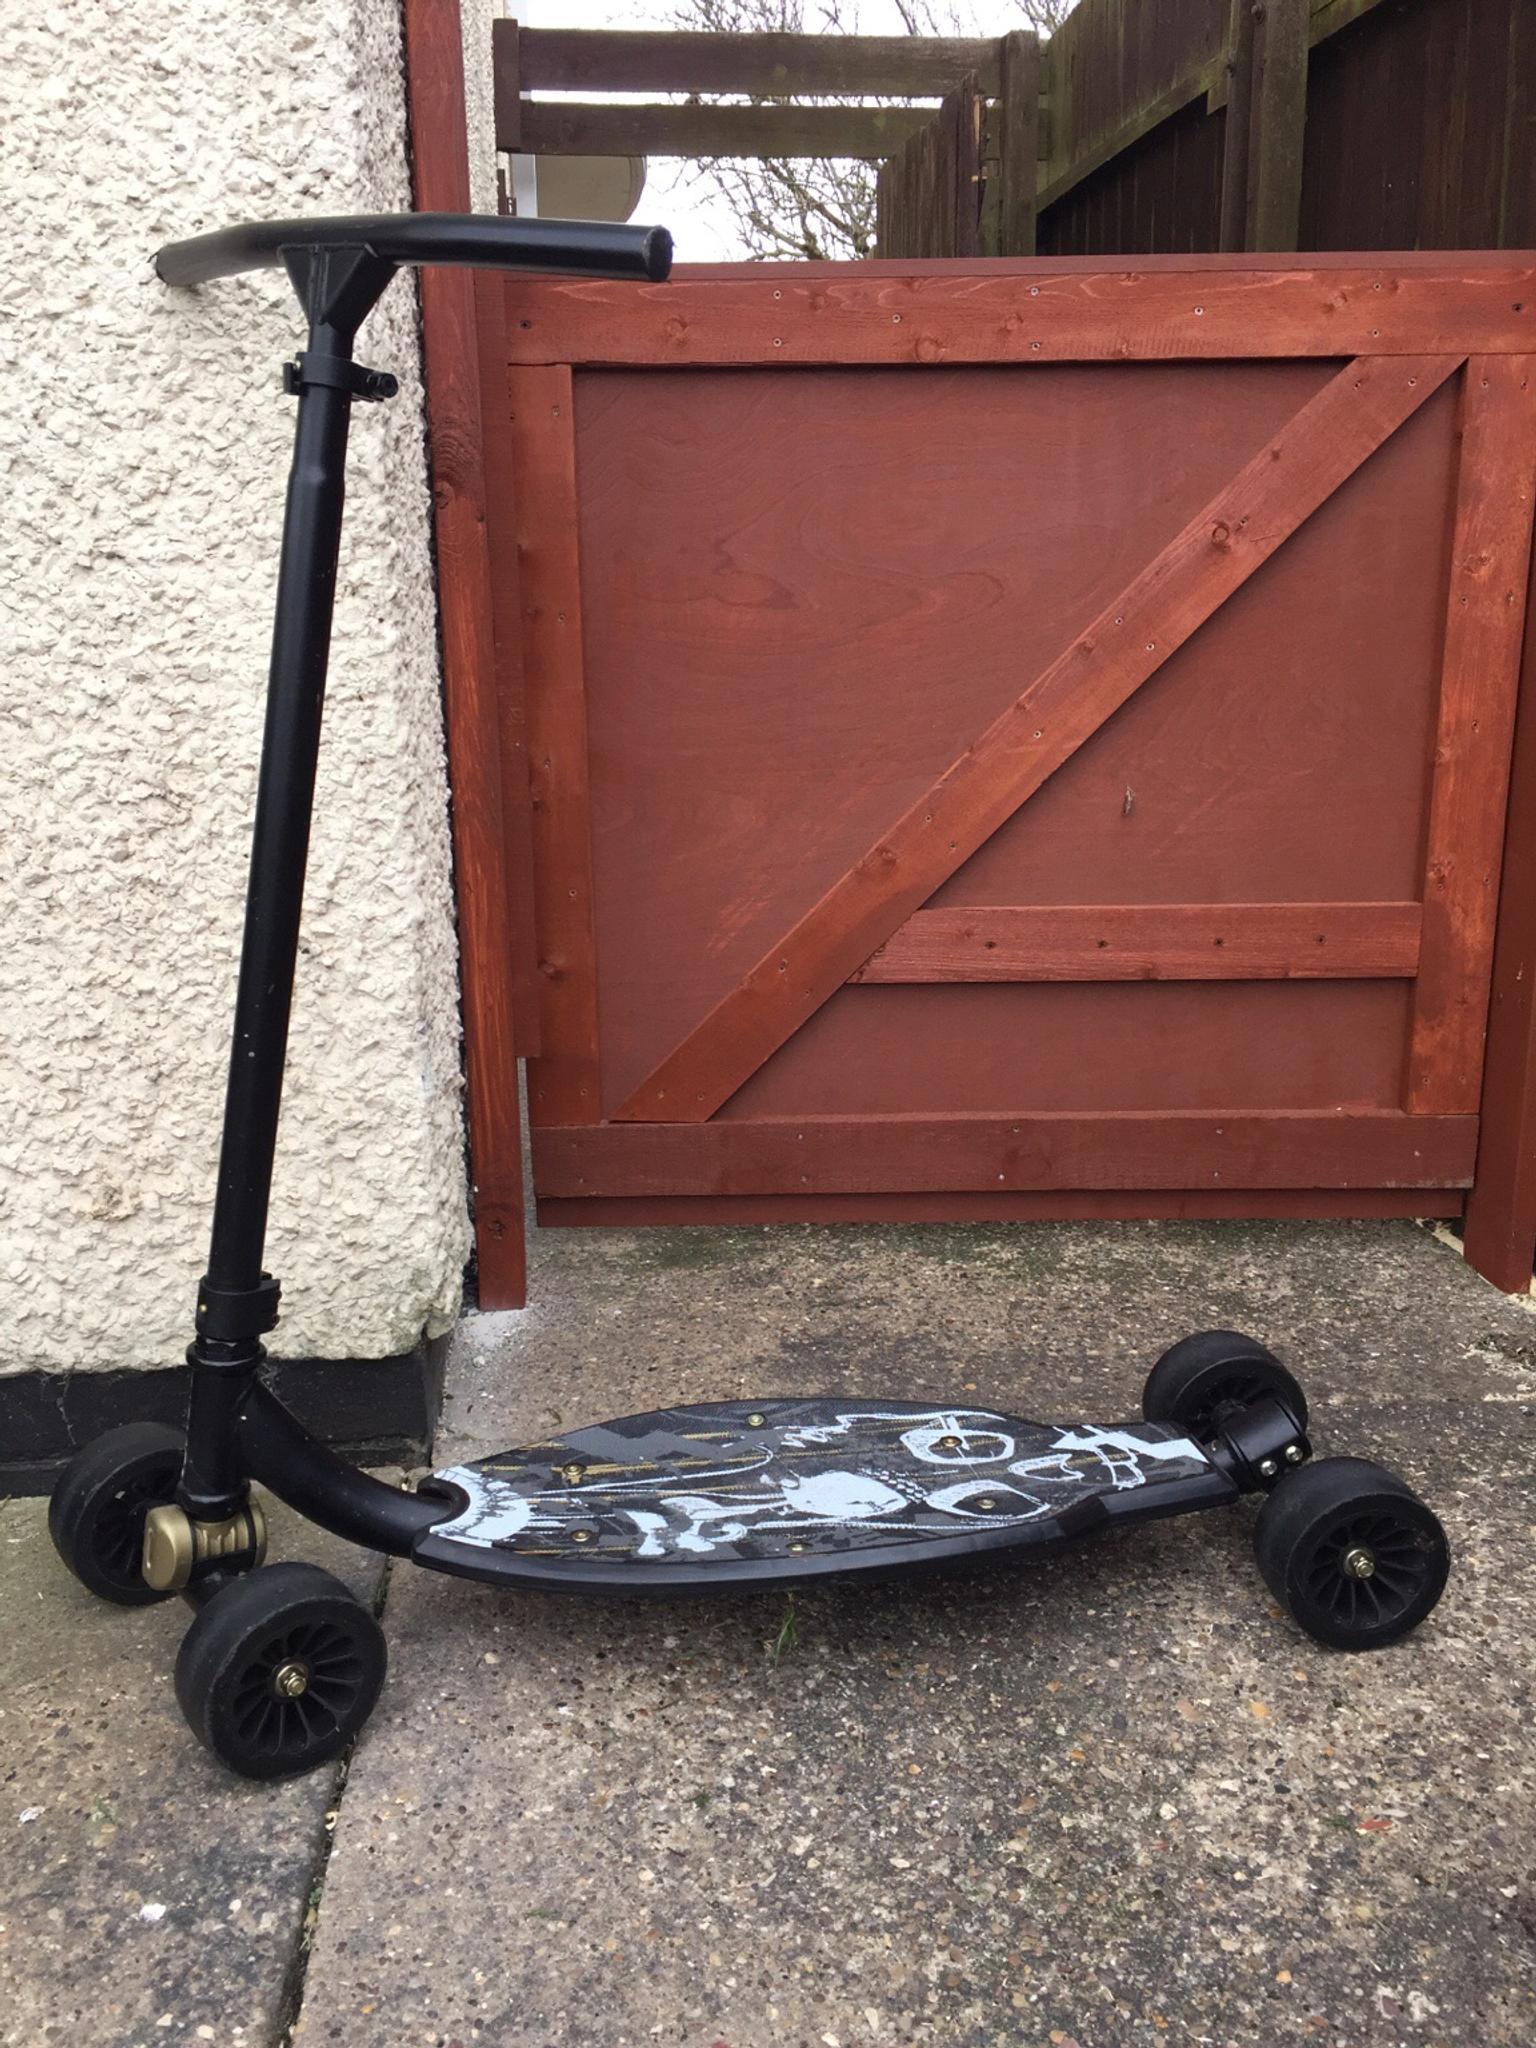 Oxelo stunstreet scooter in NG11 